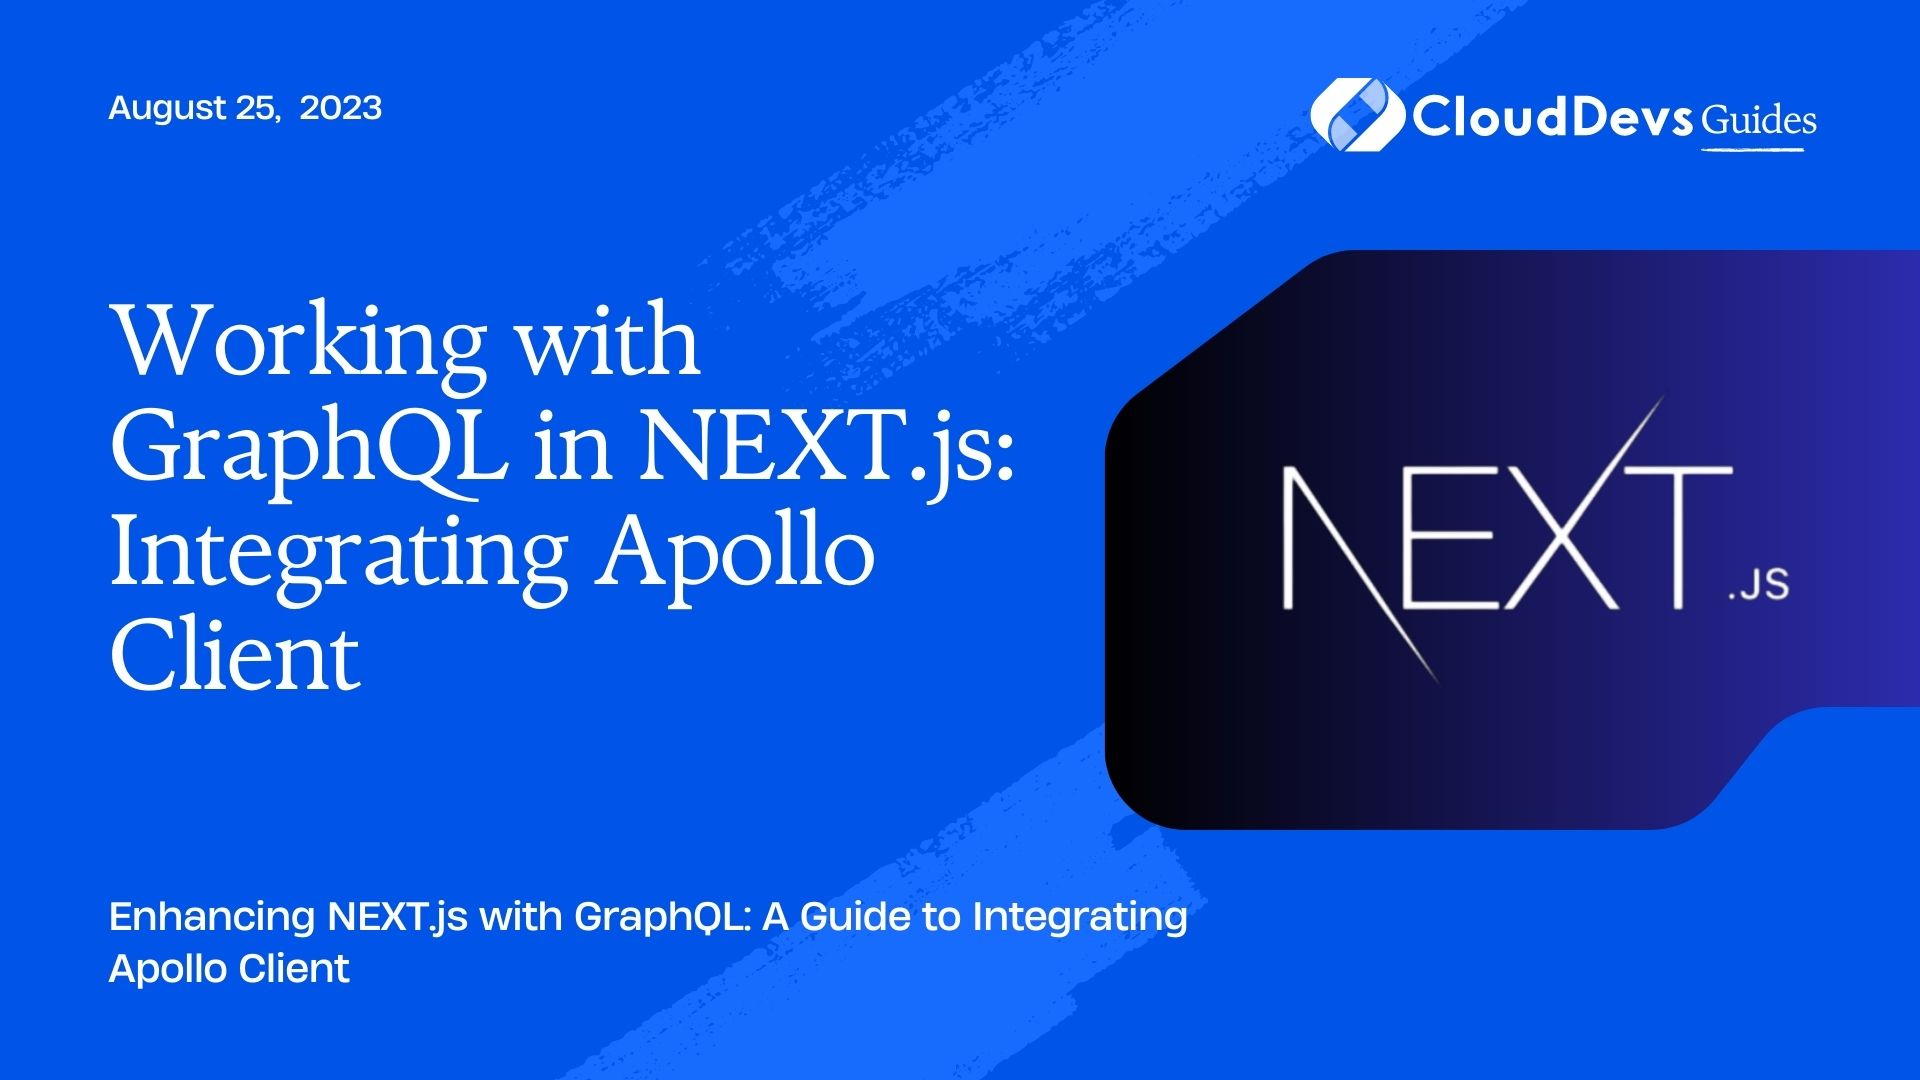 Working with GraphQL in NEXT.js: Integrating Apollo Client